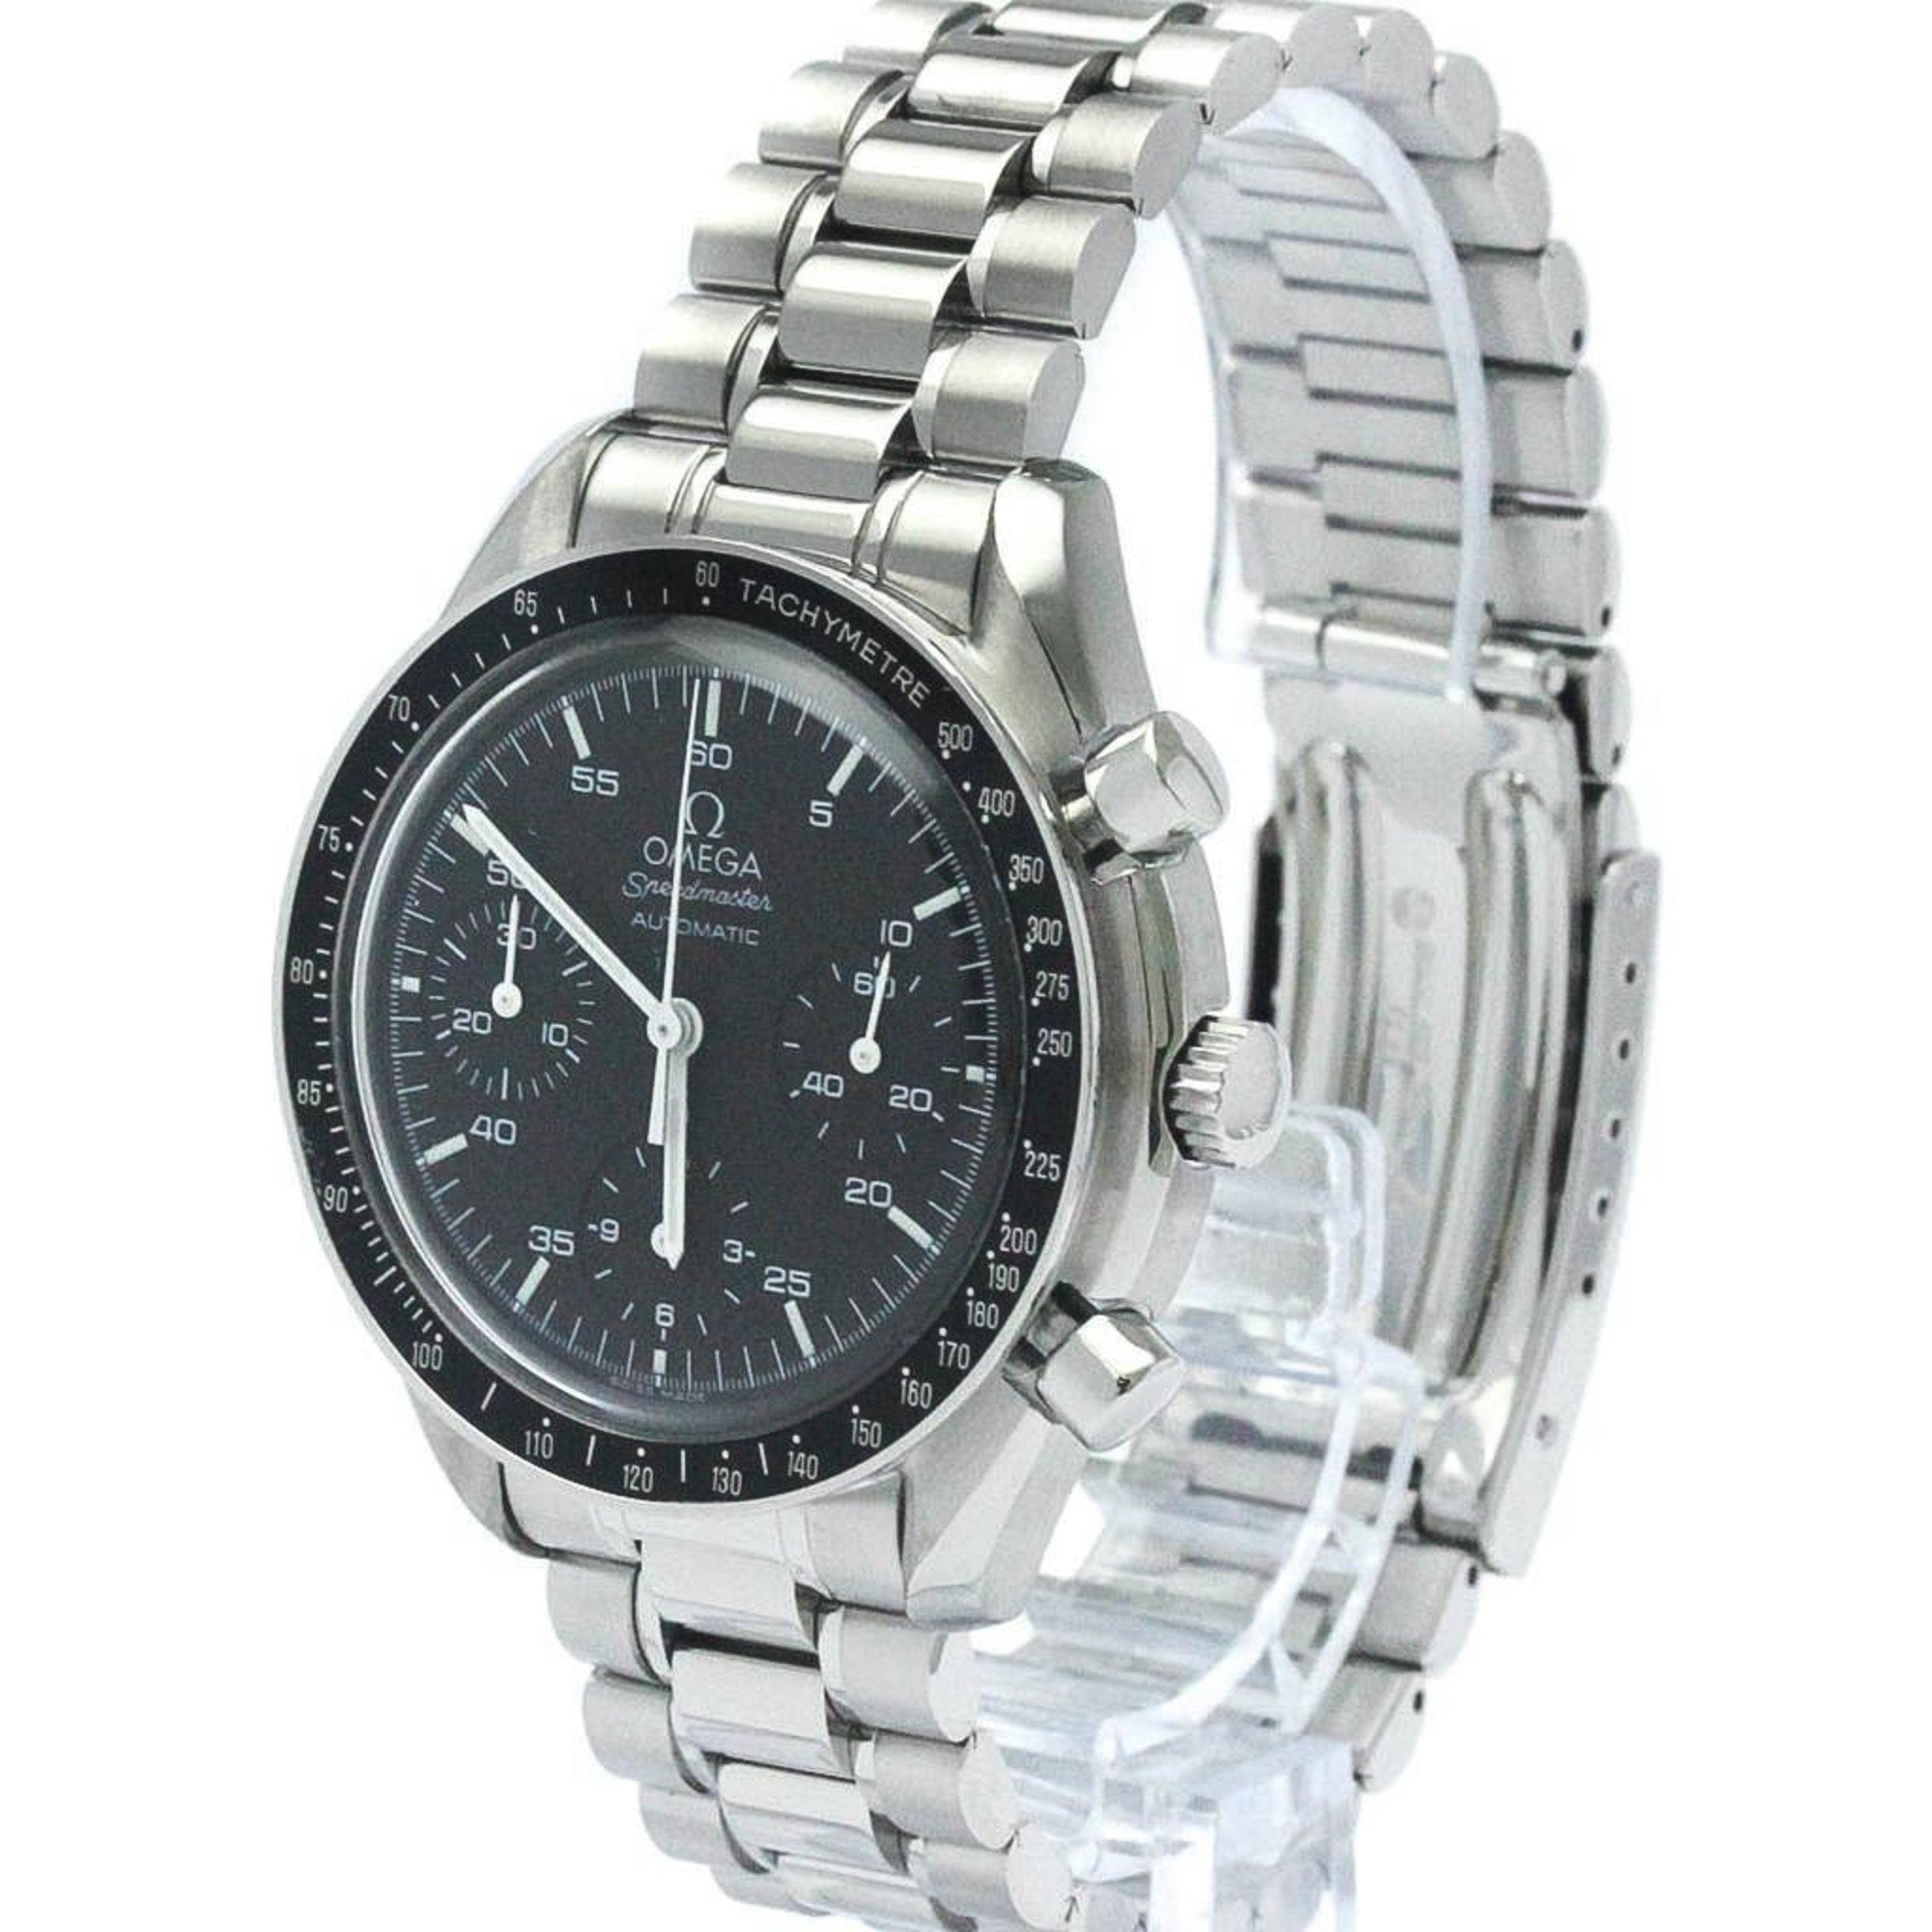 Polished OMEGA Speedmaster Automatic Steel Mens Watch 3510.50 BF566821